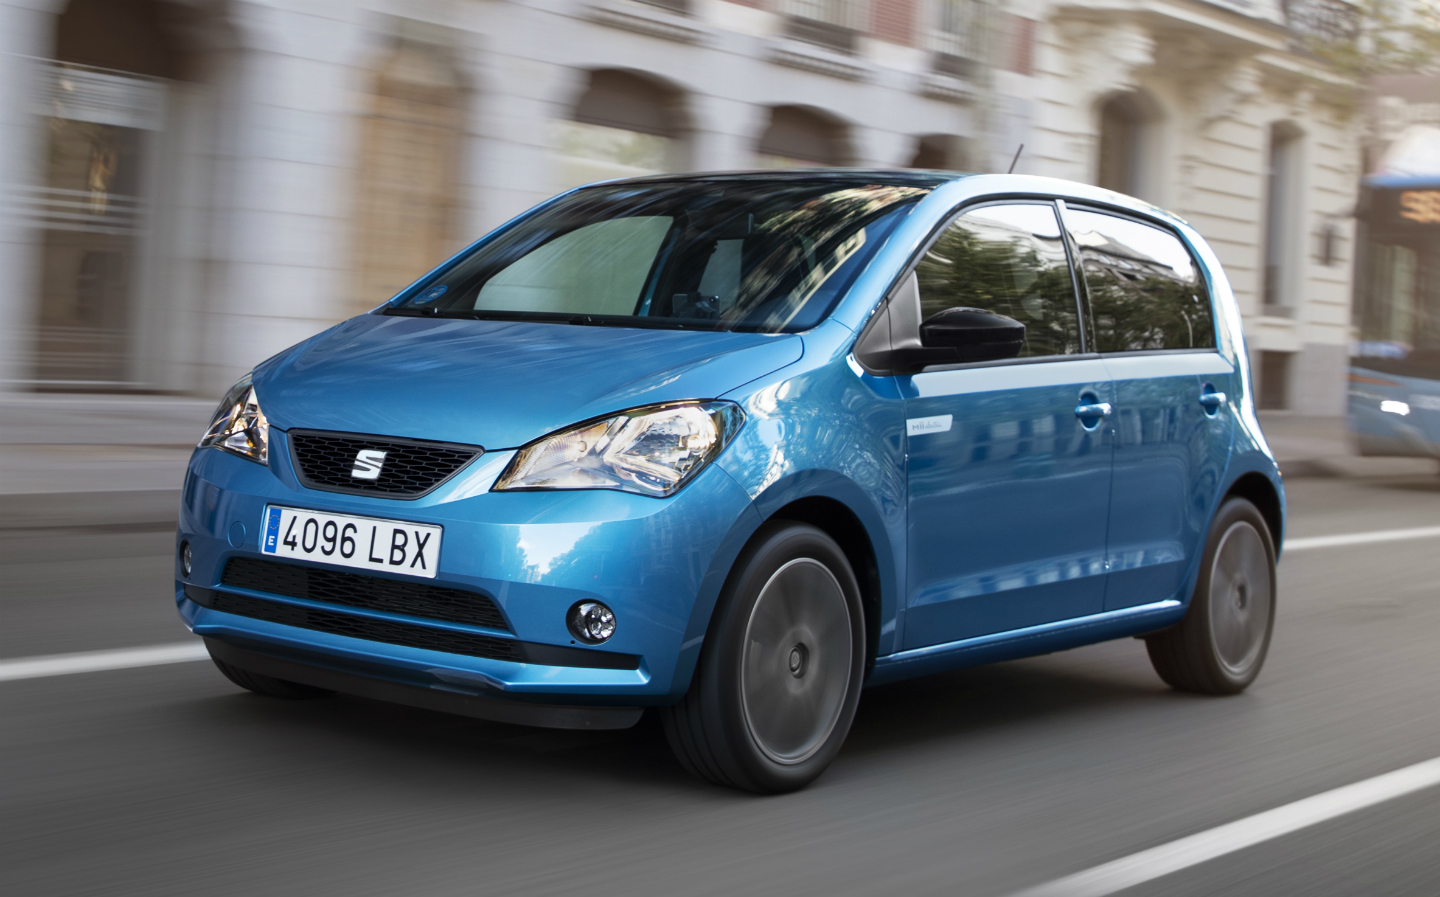 The Seat Mii city car is going electric-only